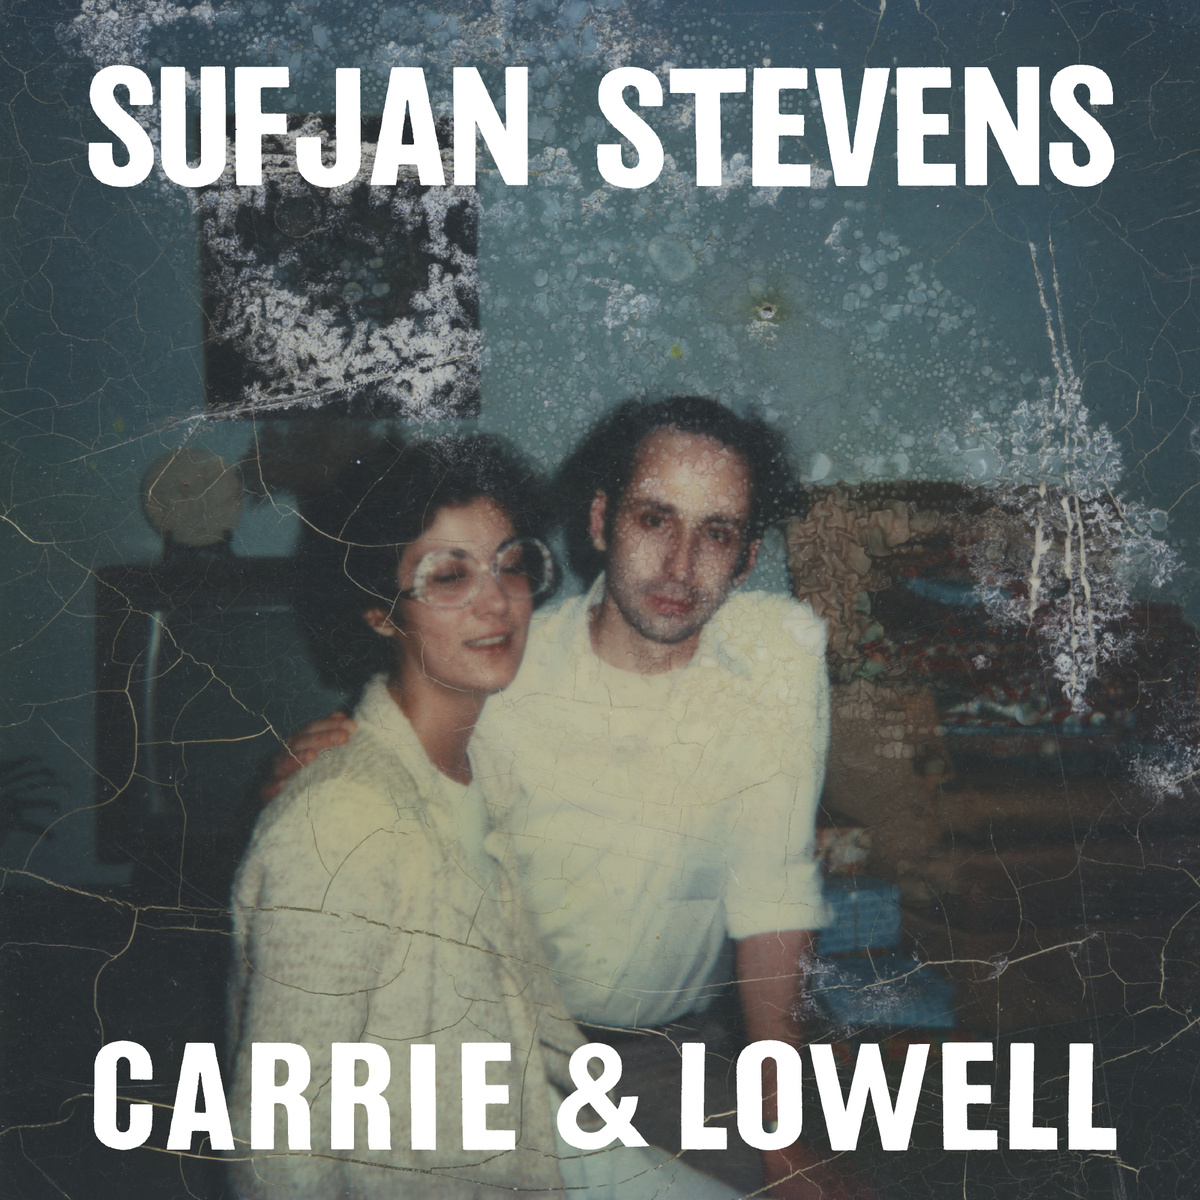 Carrie and Lowell